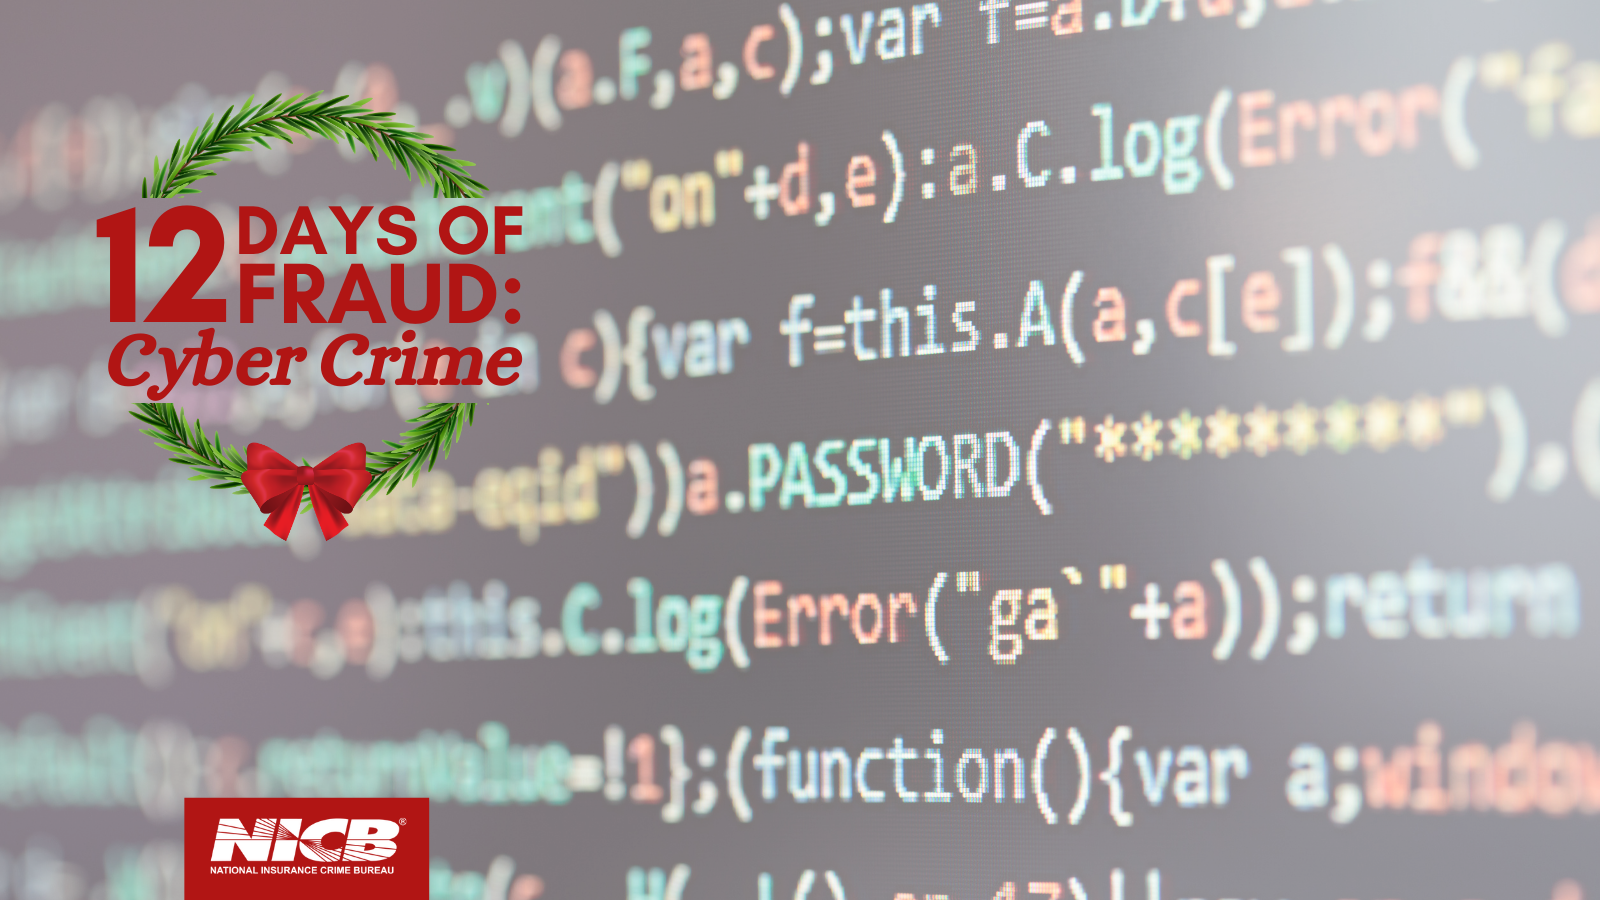 12 Days of Fraud: Day 4